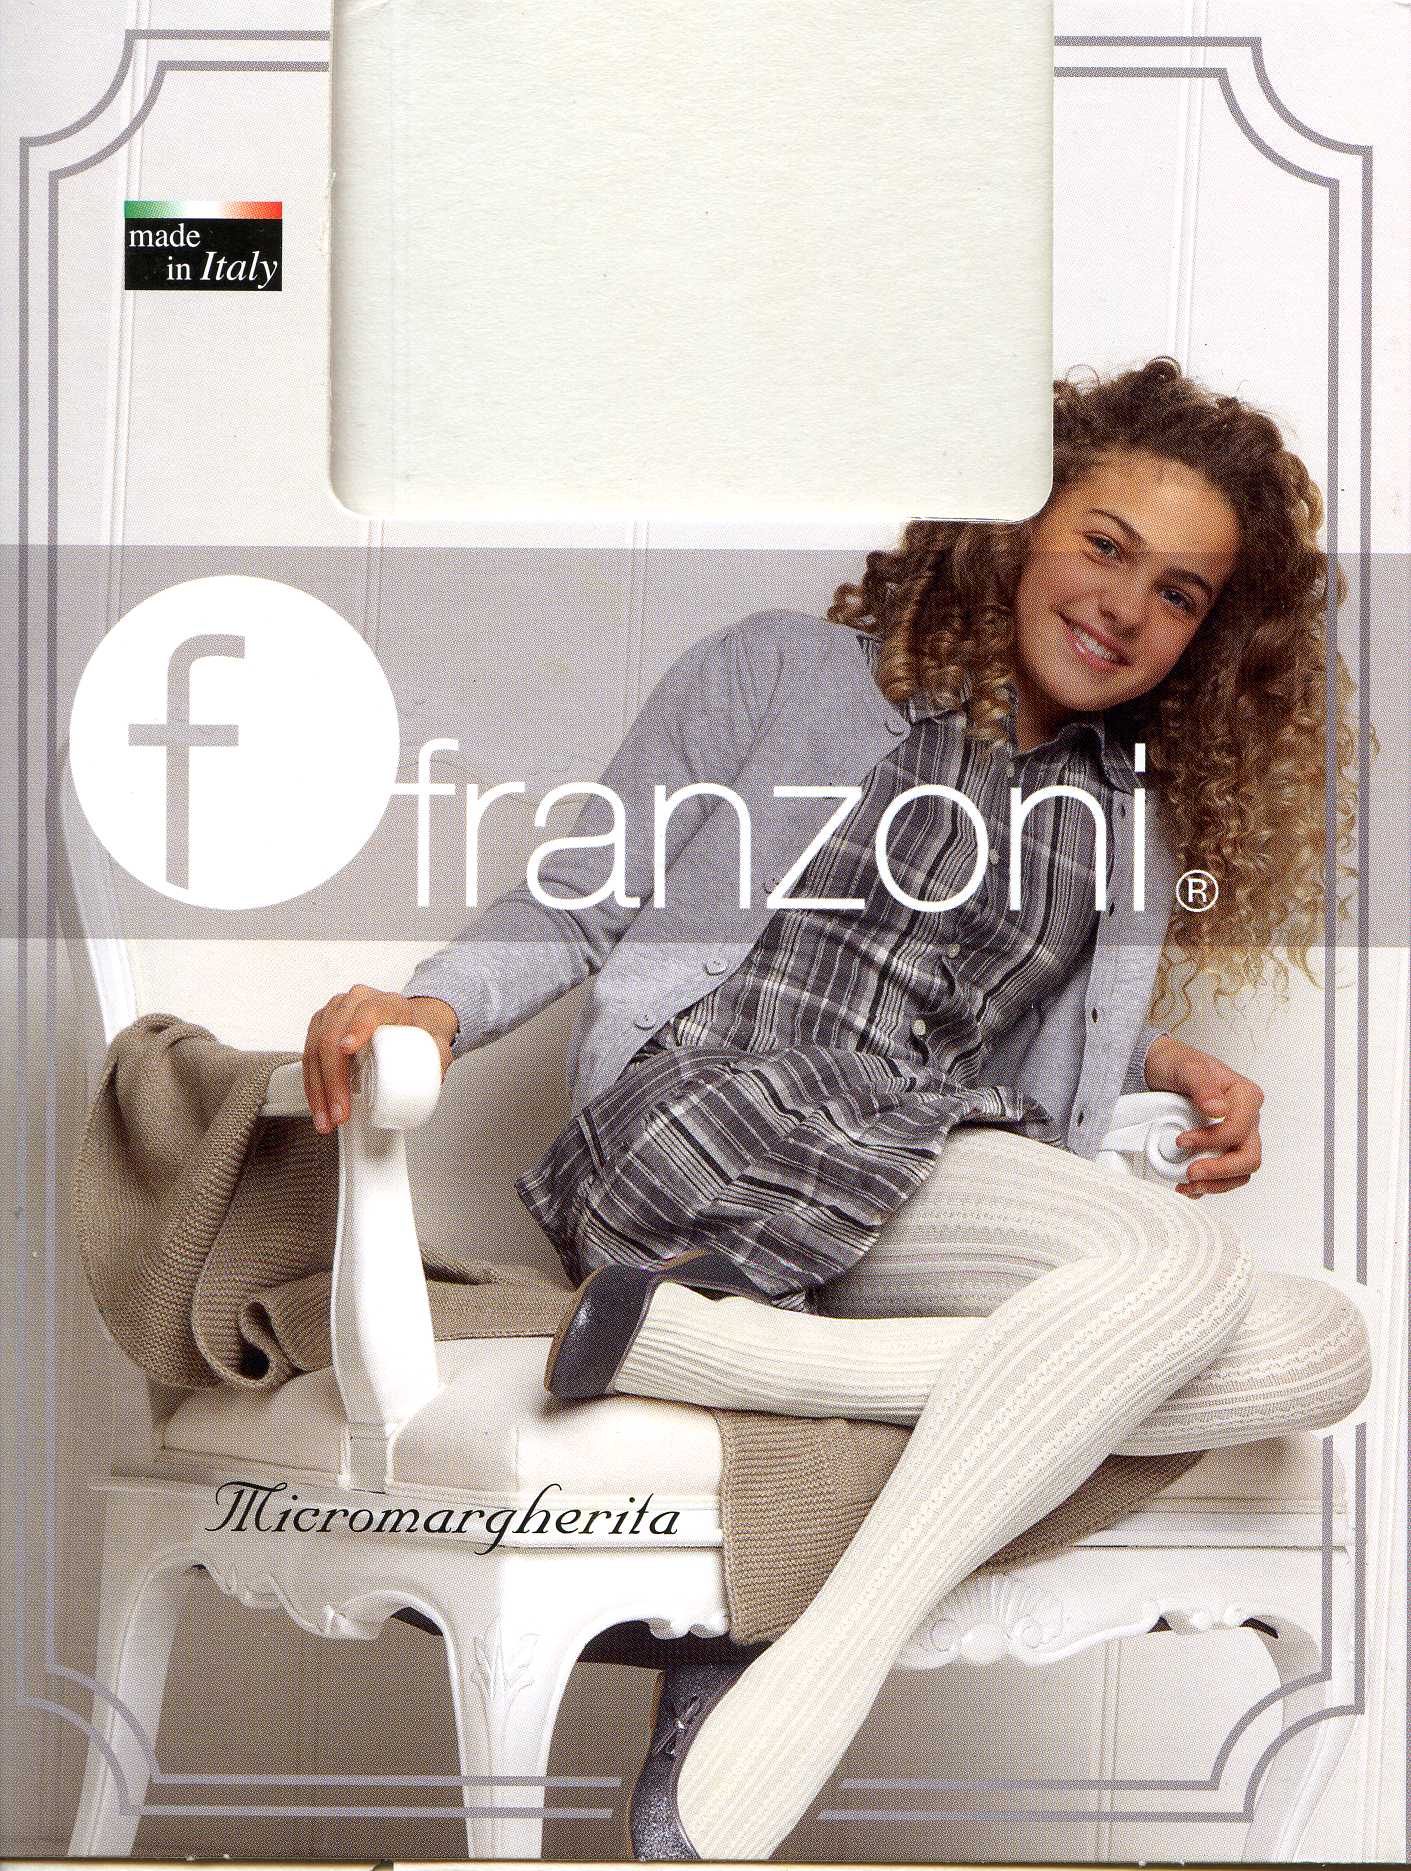 Franzoni Girls Opaque Winter Coloured Footless Tights – Italian Tights